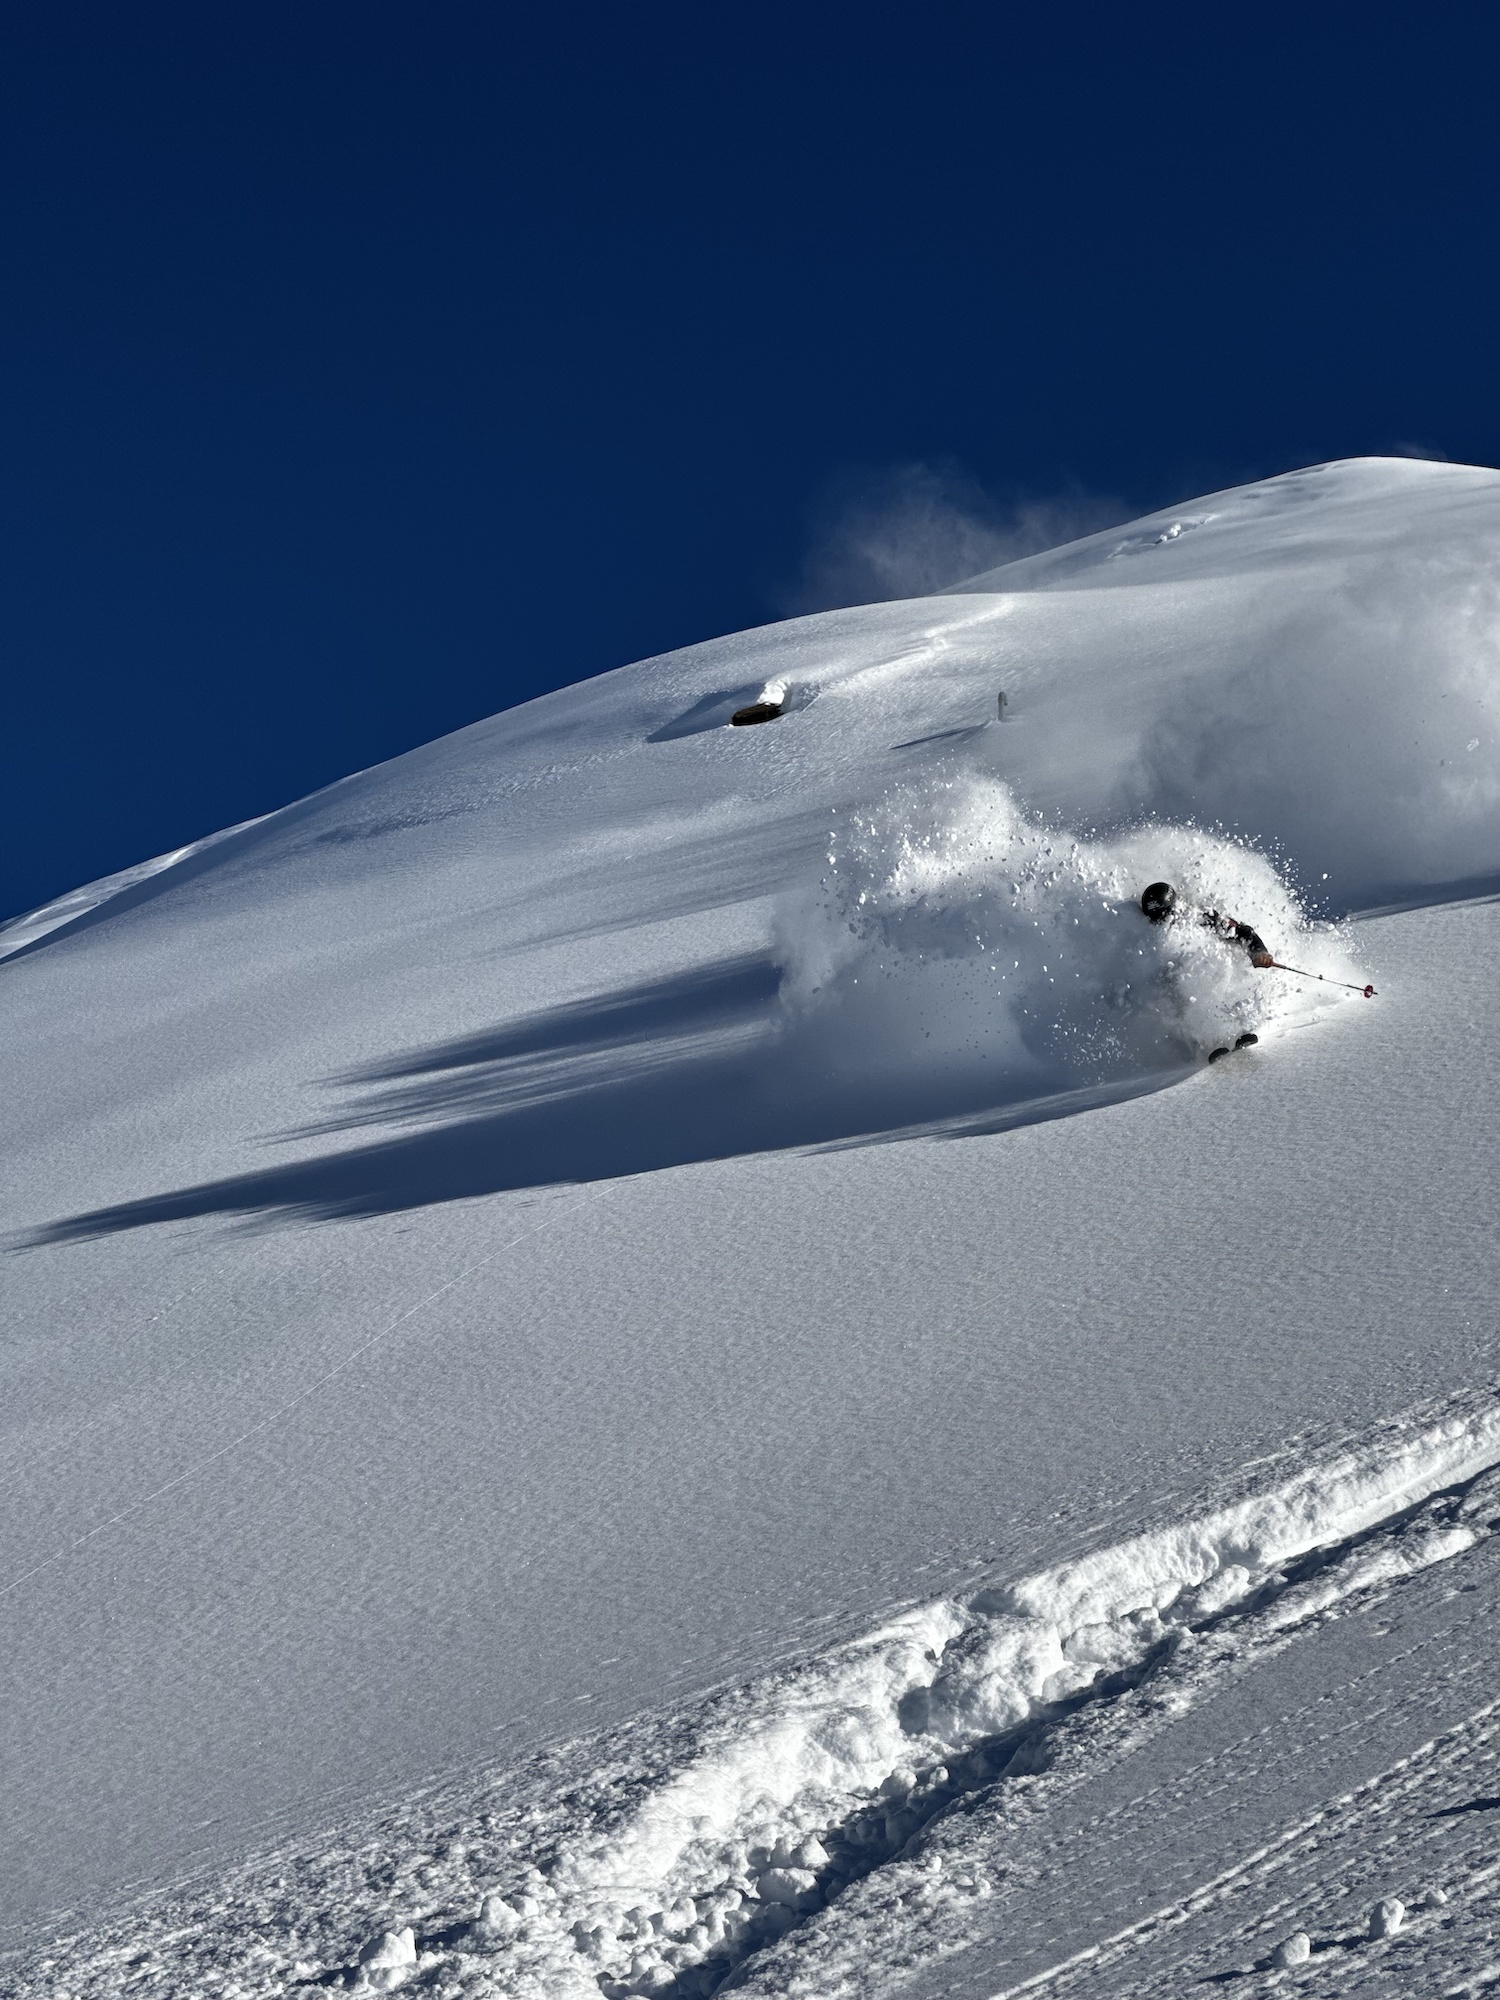 Skier in the powder on a sunny mountainside.